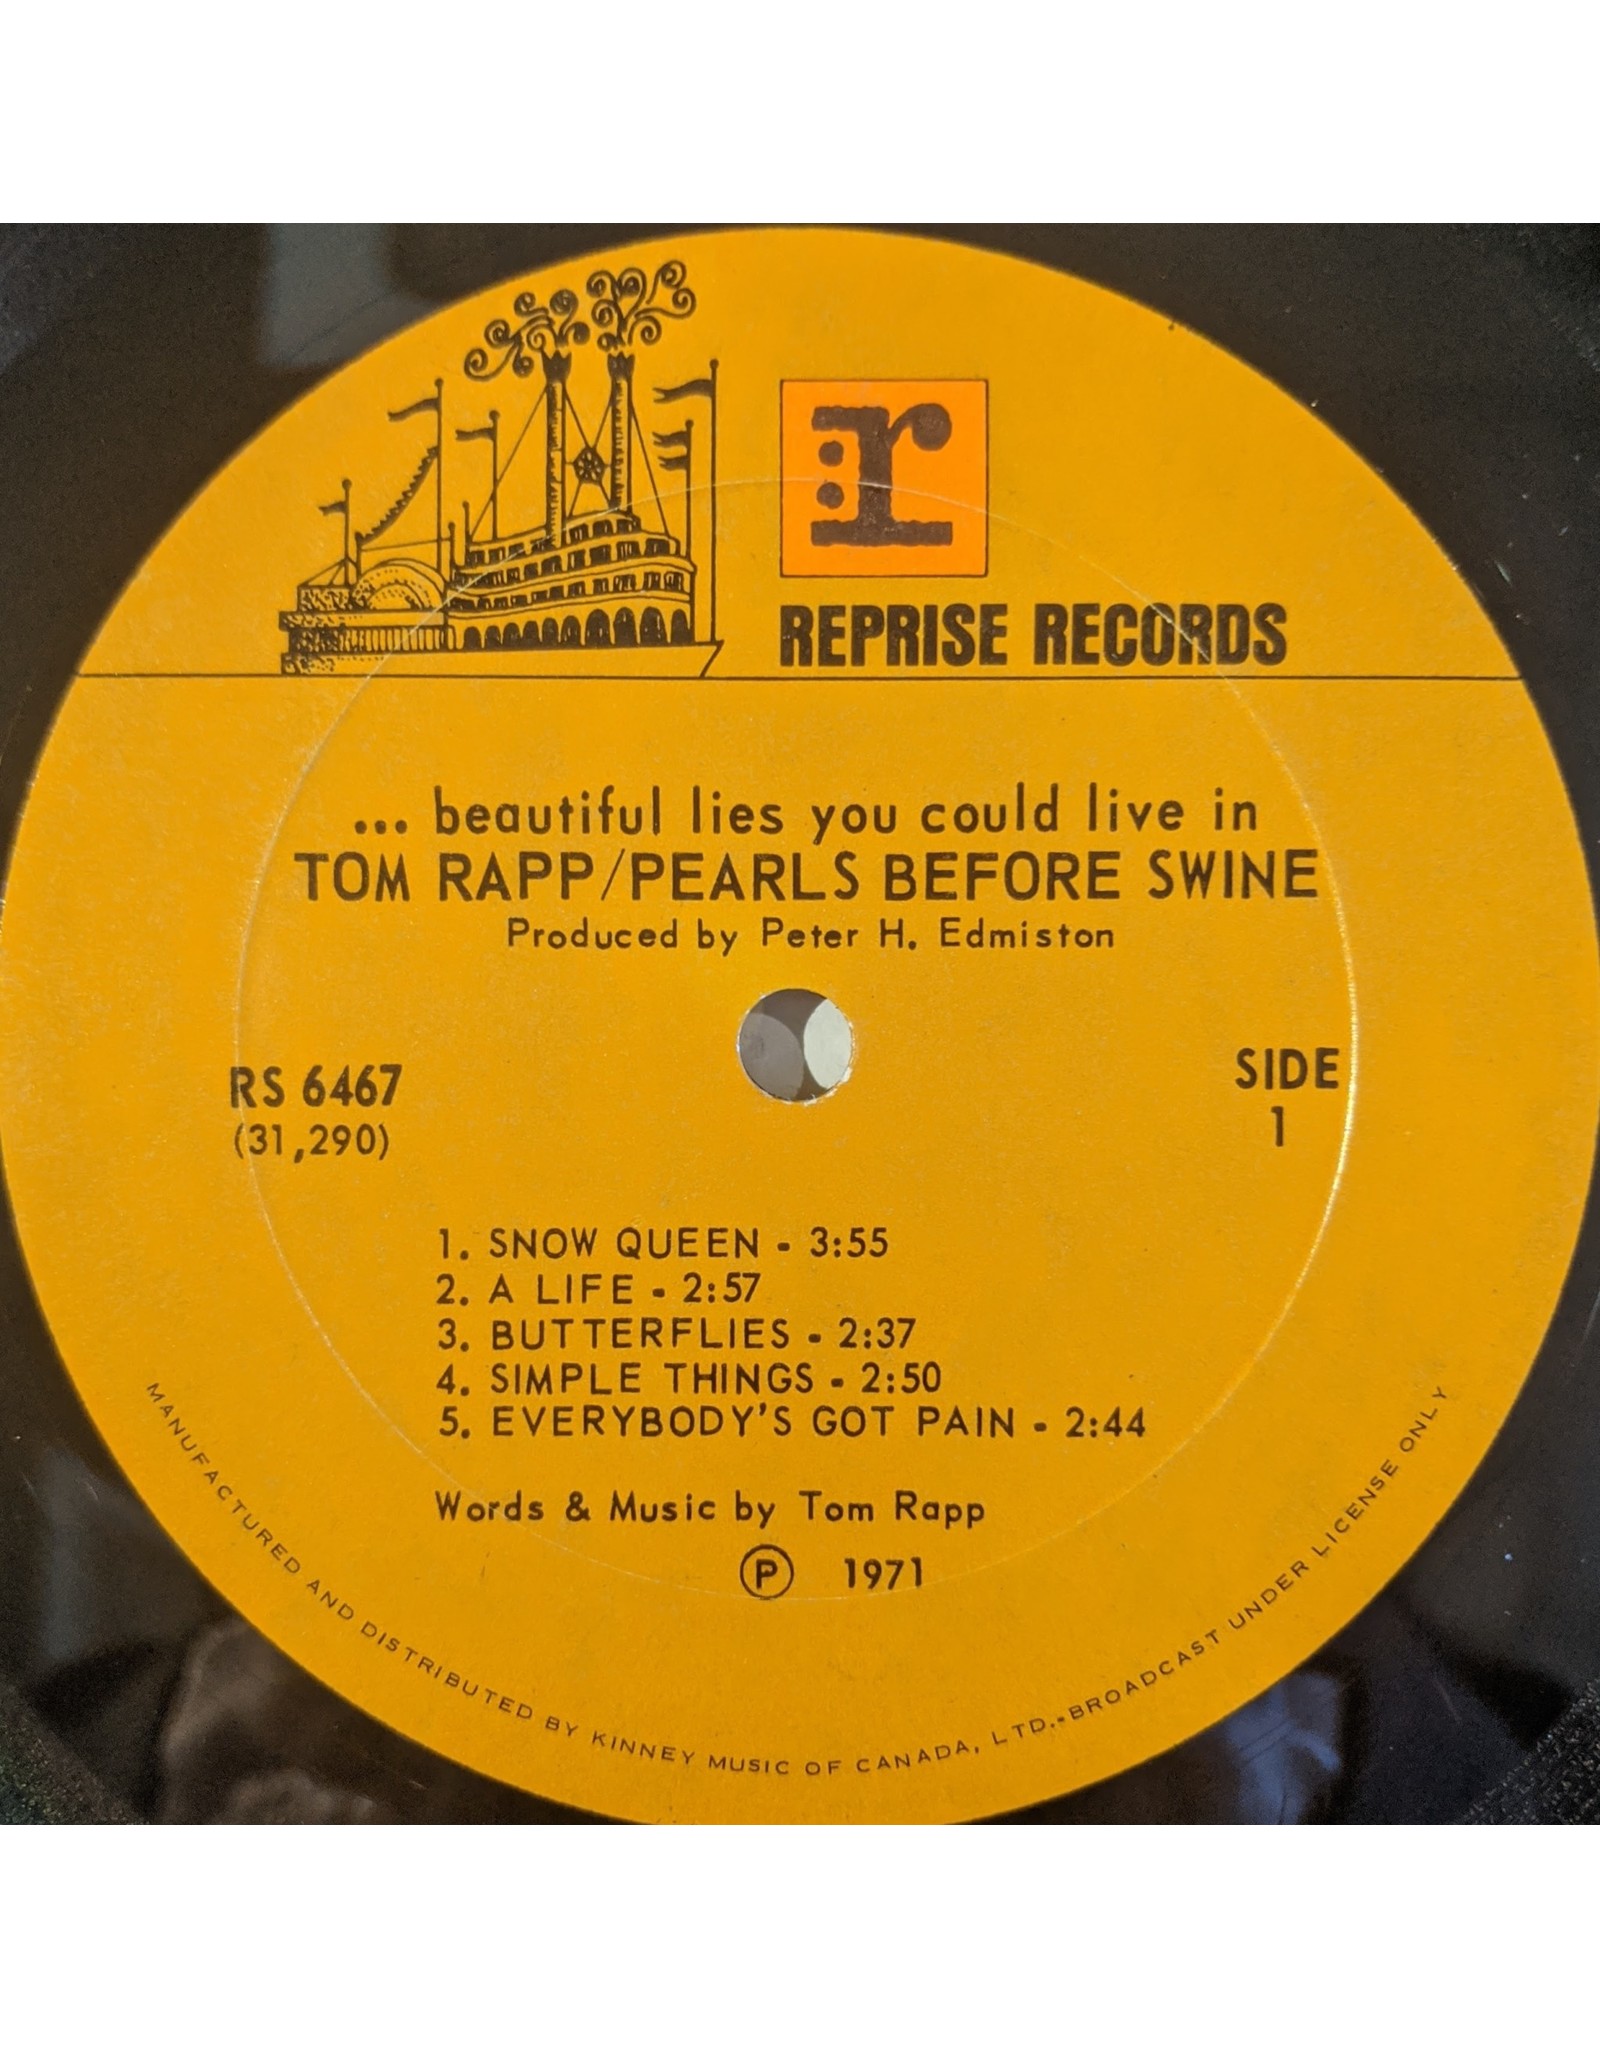 USED: Tom Rapp/Pearls Before Swine: ...Beautiful Lies You Could Live In LP